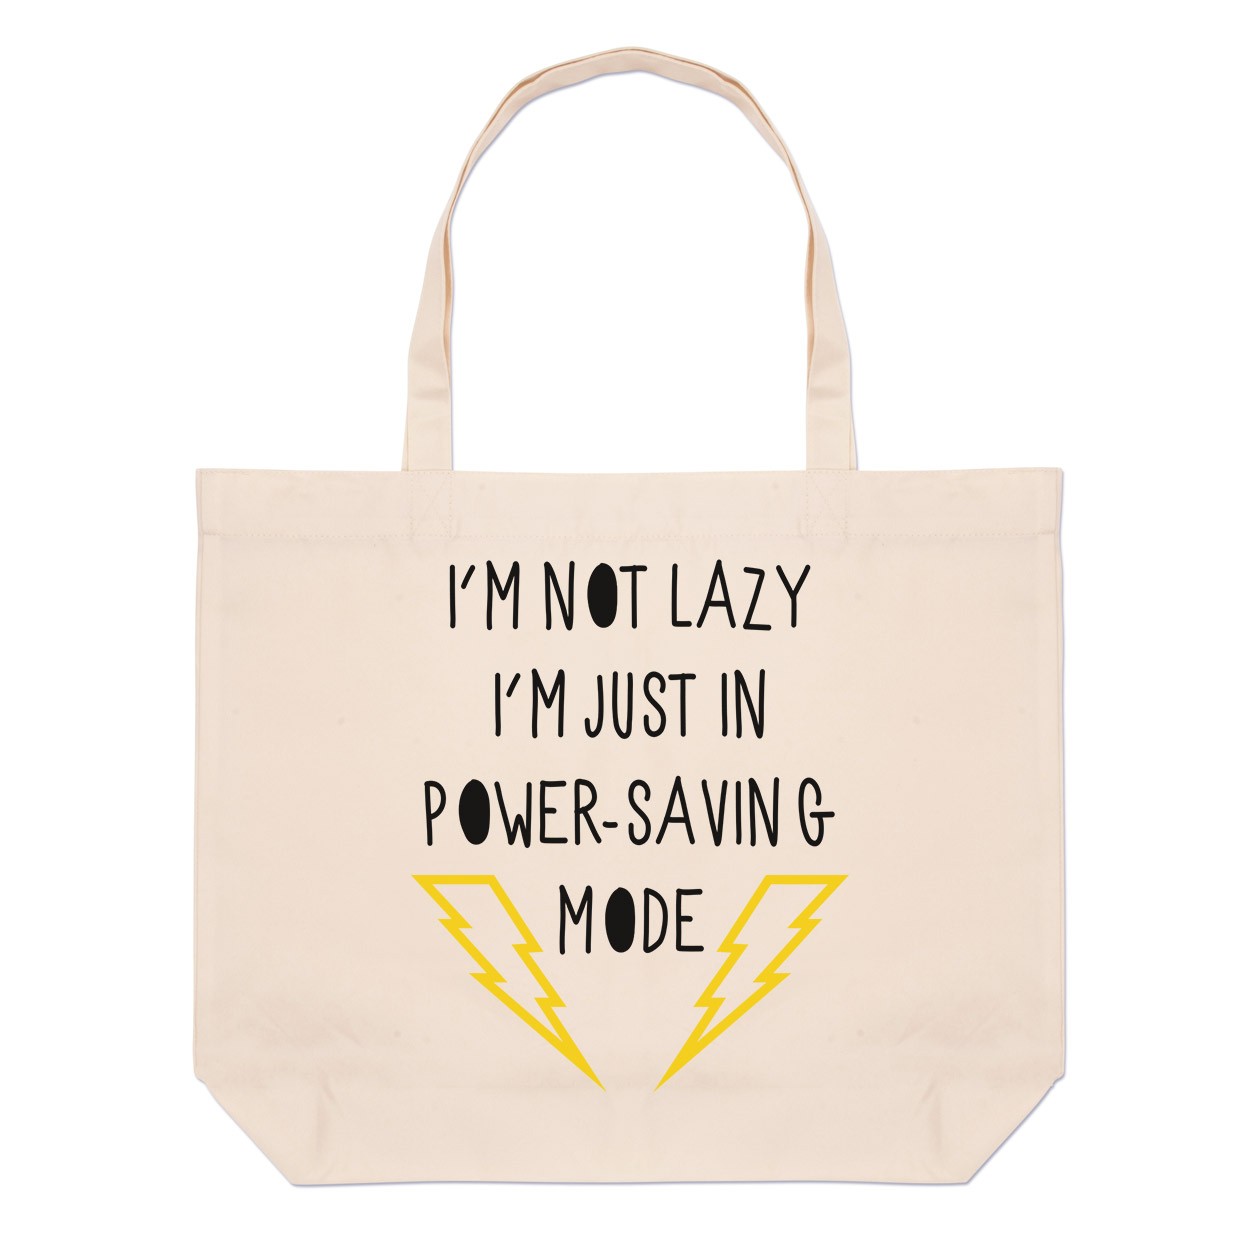 I'm Not Lazy I'm Just In Power Saving Mode Large Beach Tote Bag